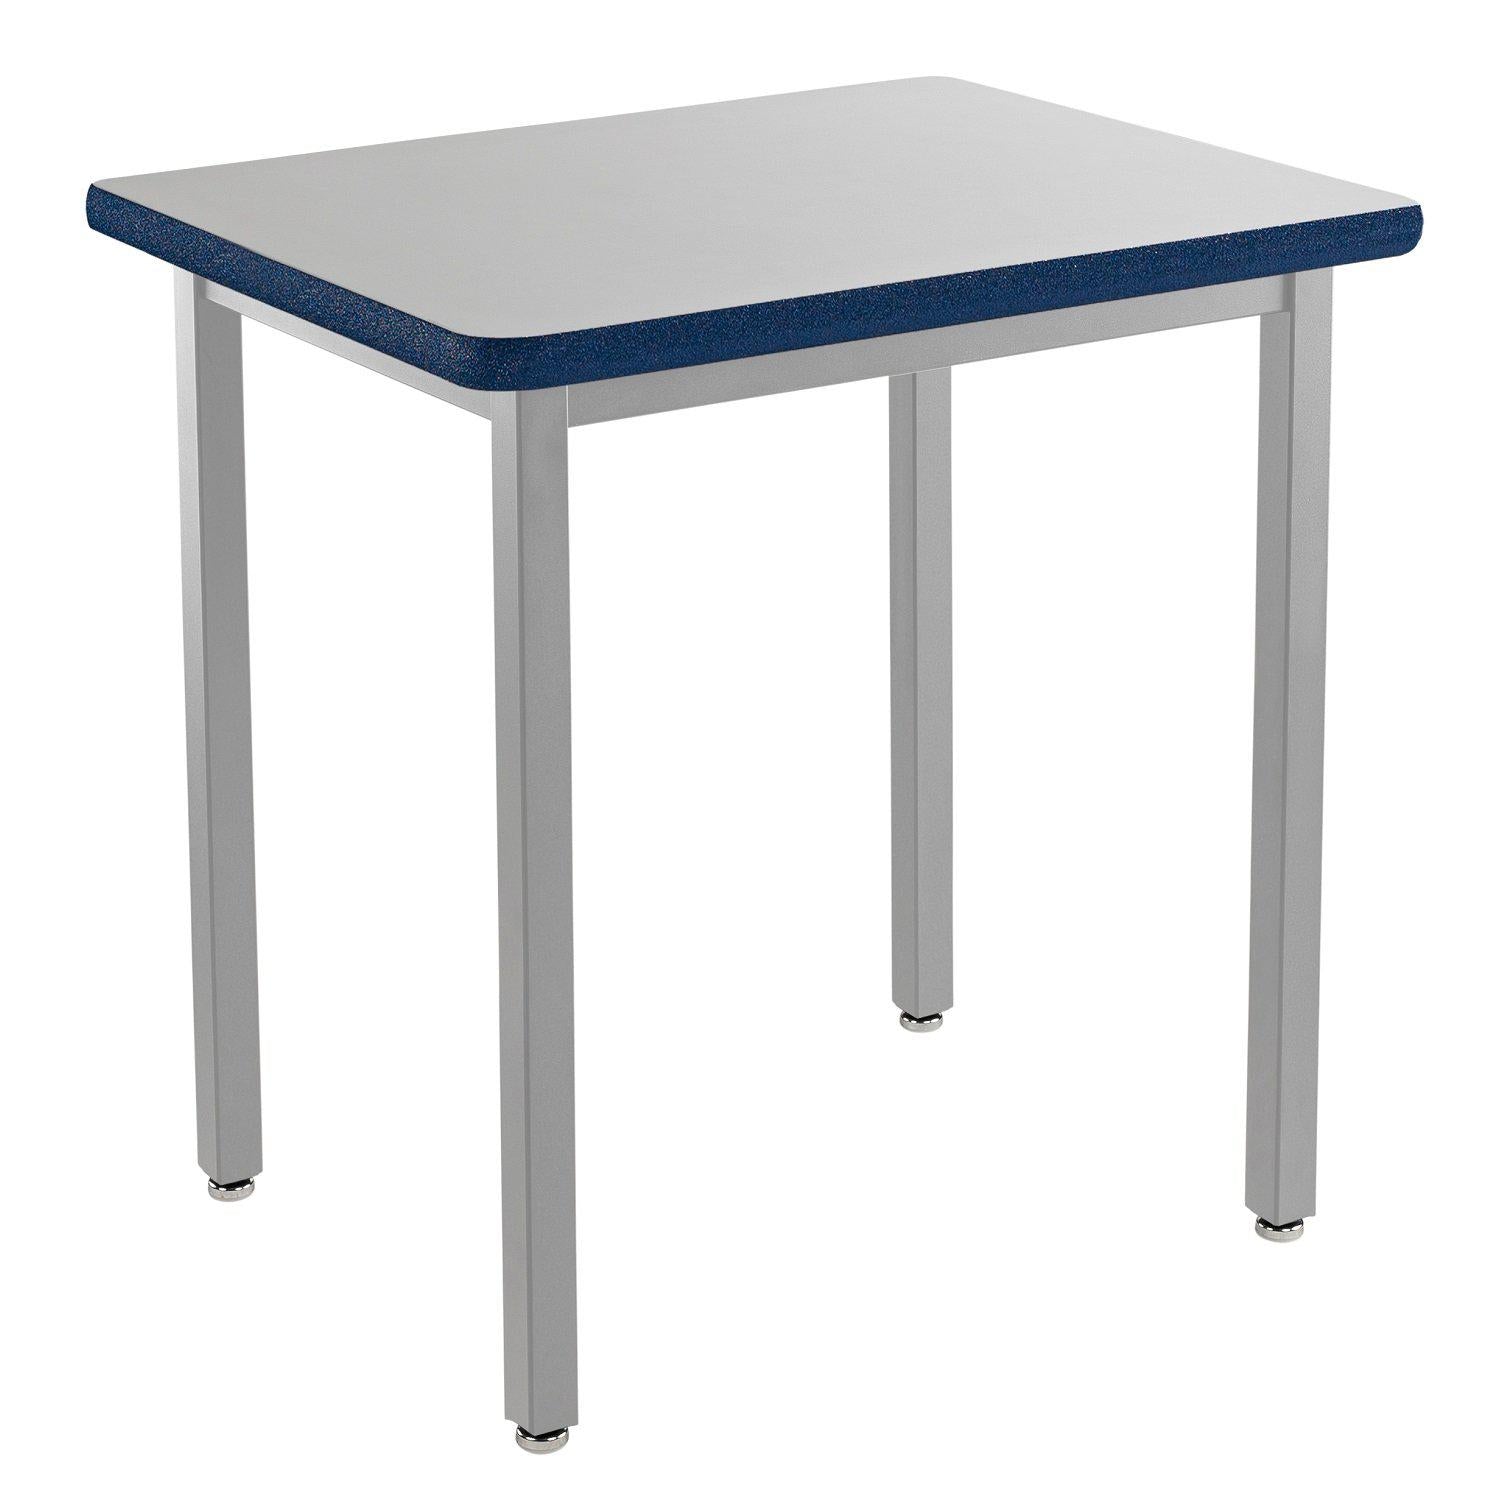 Heavy-Duty Fixed Height Utility Table, Soft Grey Frame, 24" x 36", Supreme High-Pressure Laminate Top with Black ProtectEdge